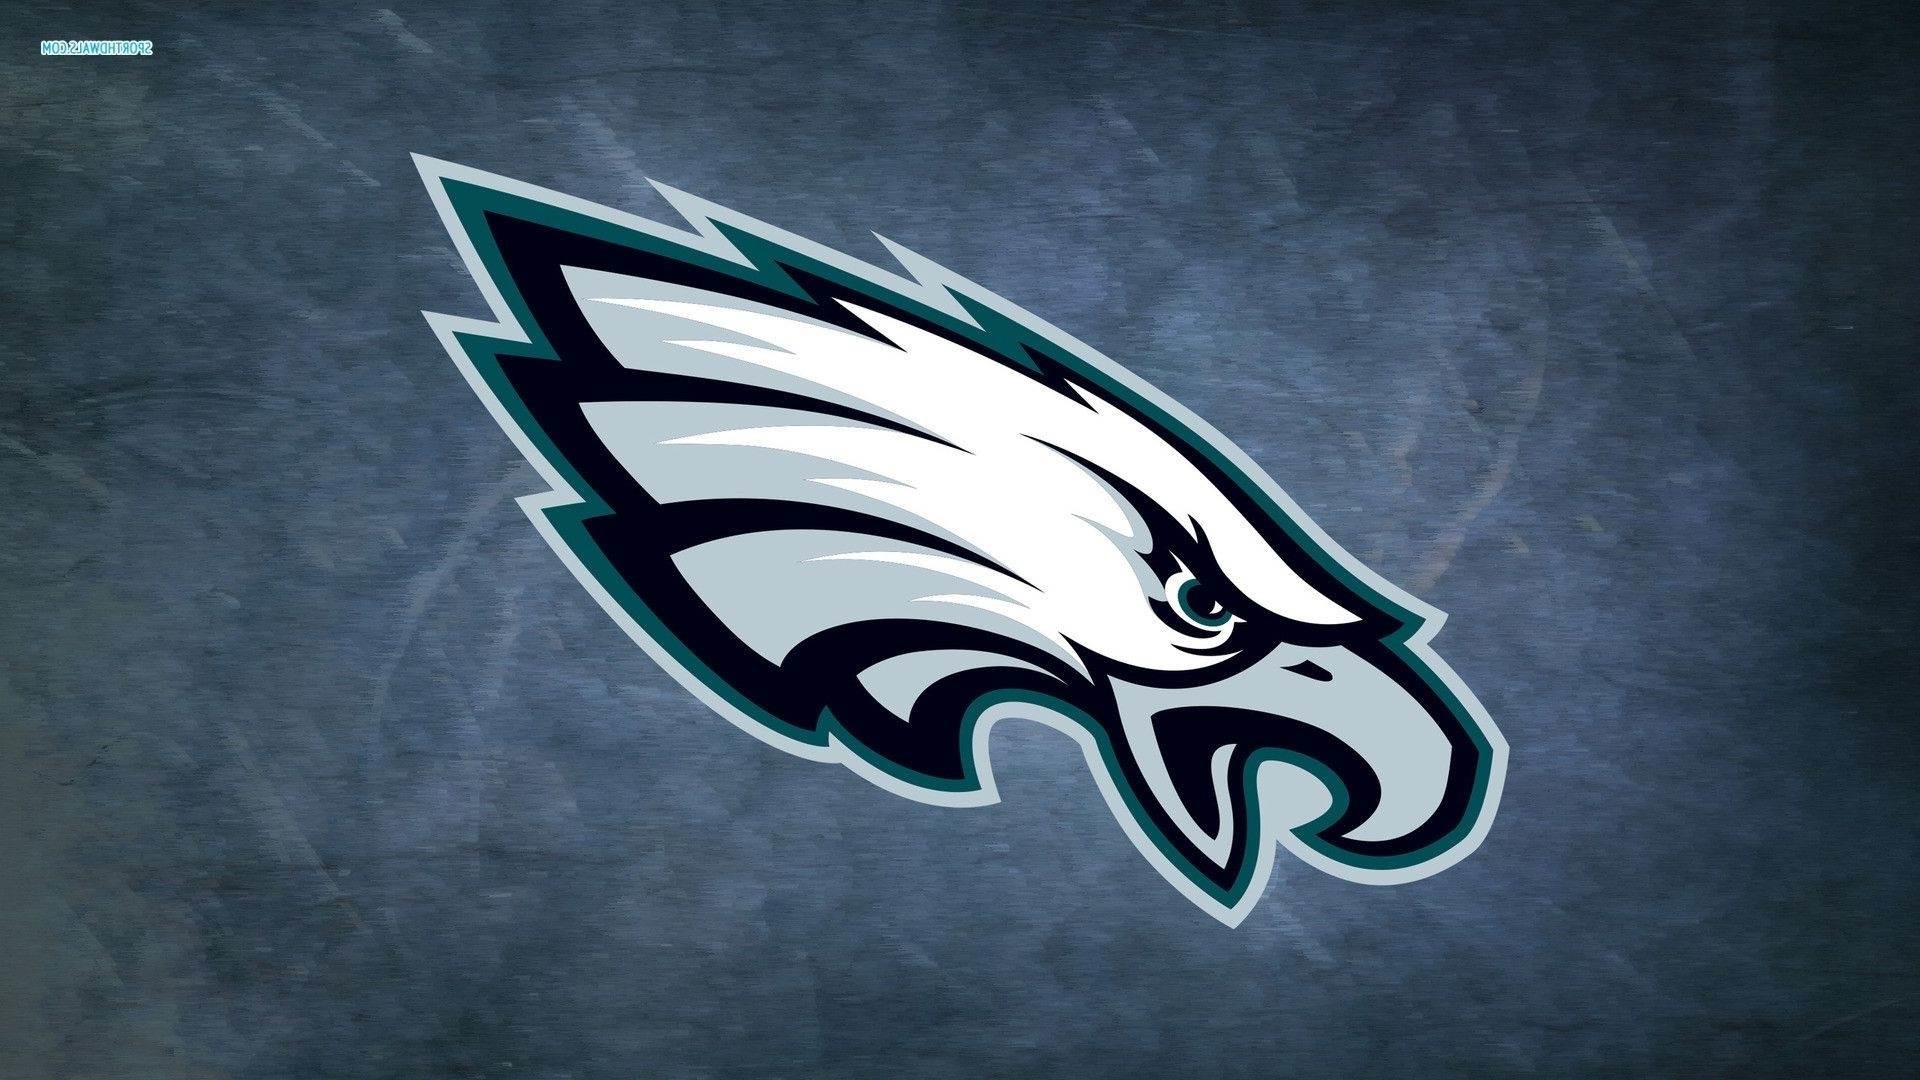 1920x1080 + images about Philly boy on Pinterest Stop signs, Bunker 1440Ã900 Free  Philadelphia Â· Philadelphia Eagles WallpaperEagle WallpaperStop SignsBunker